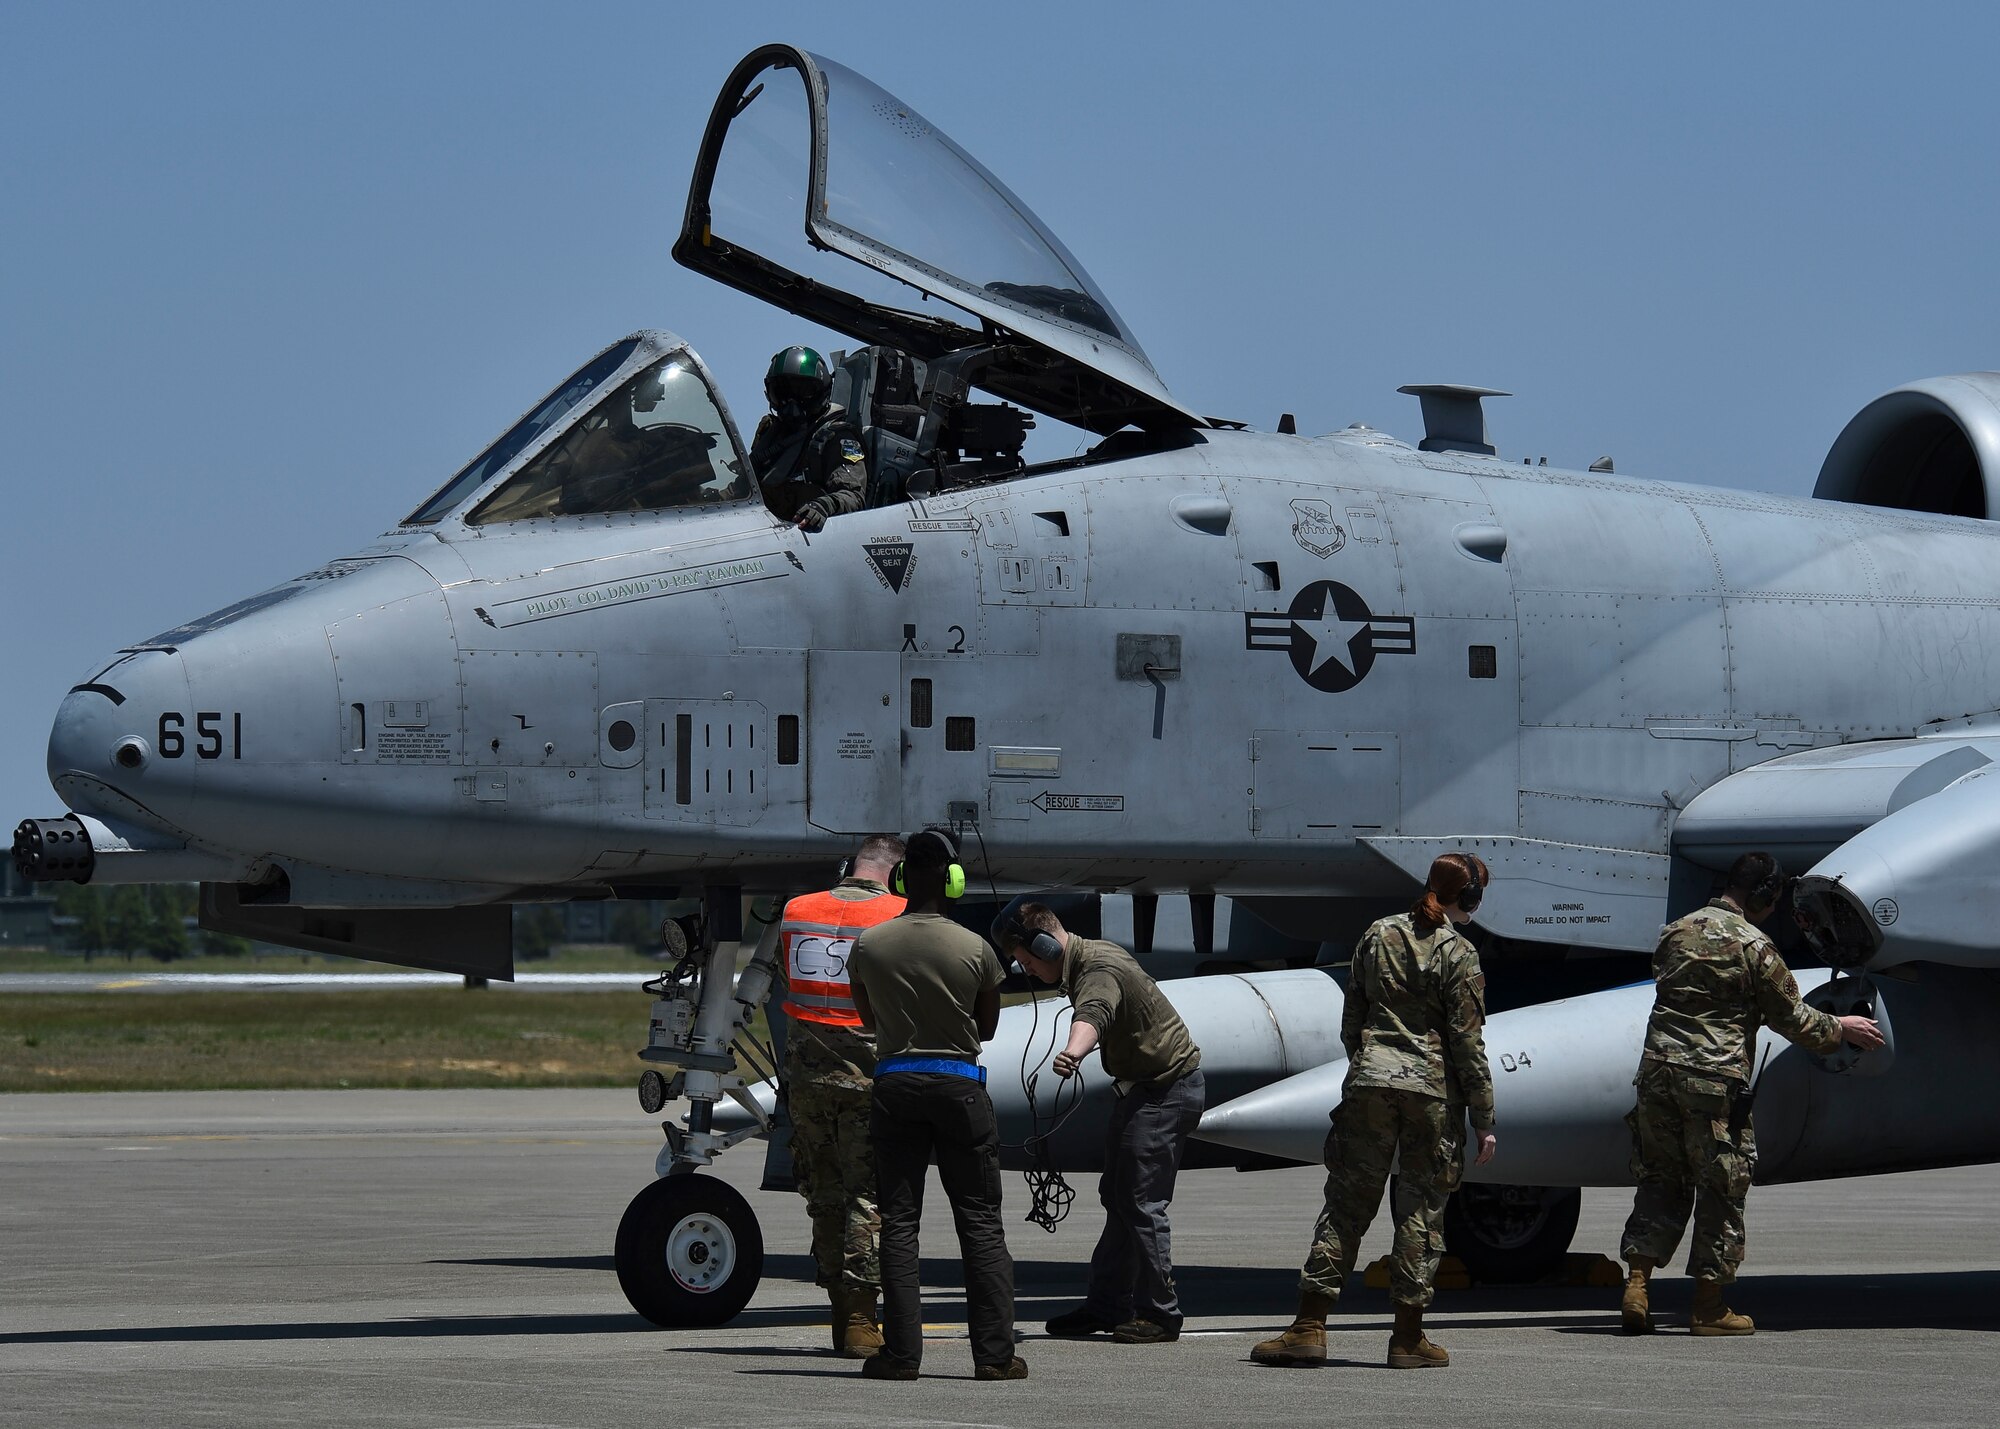 Service members work around a parked aircraft.